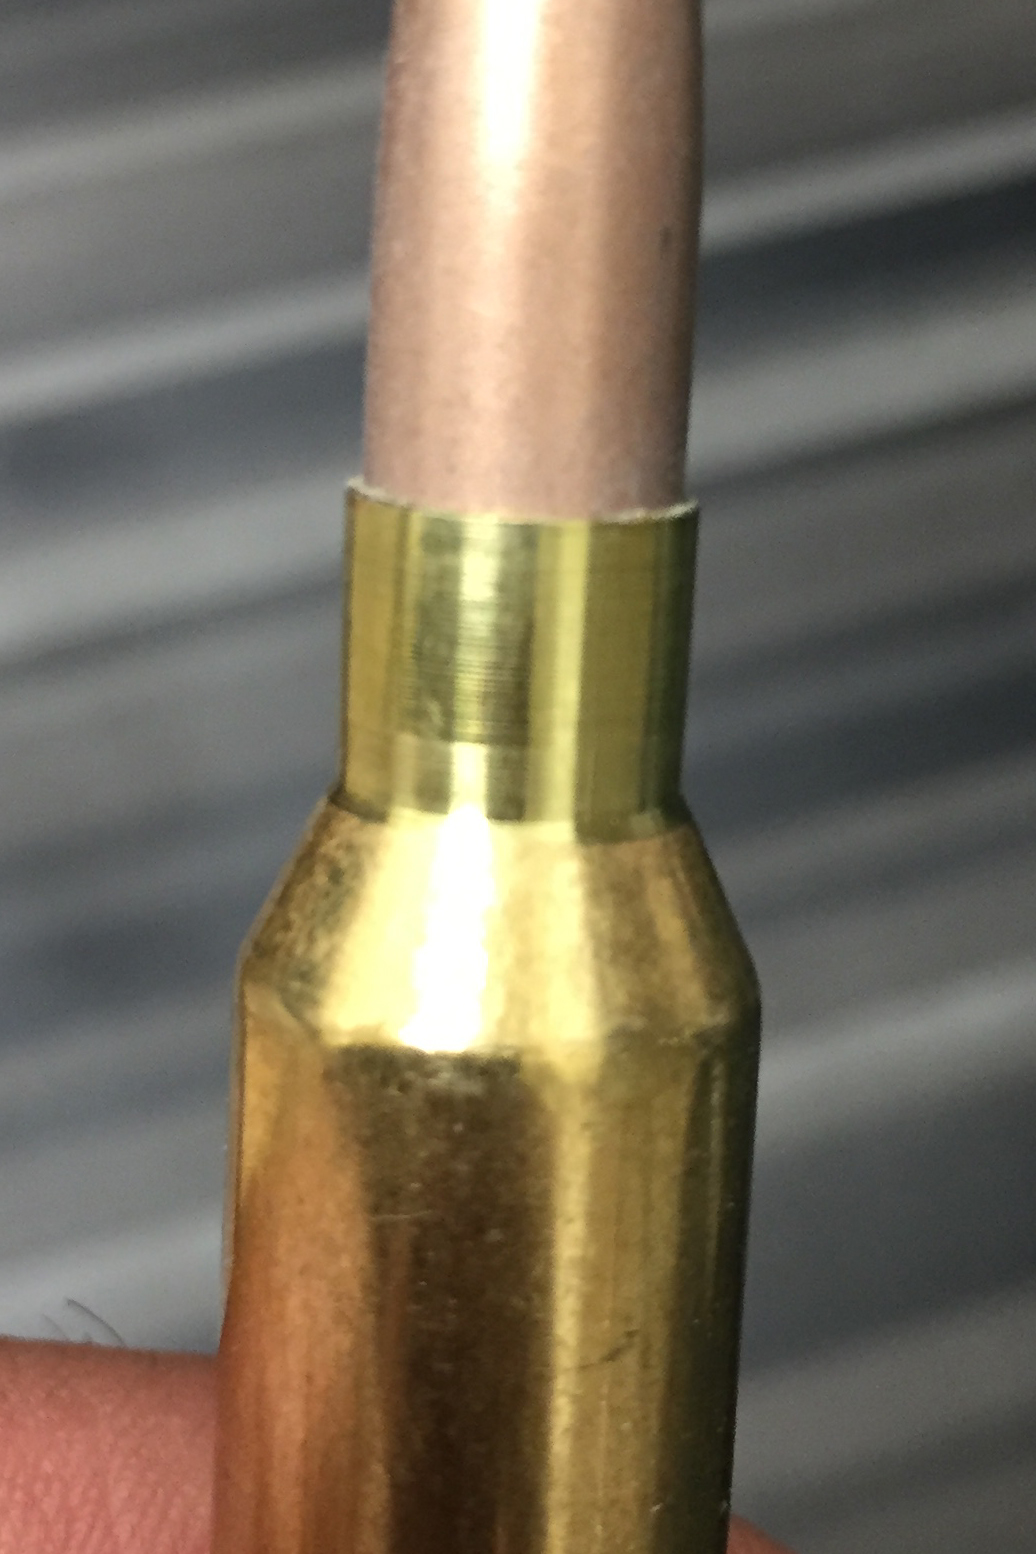 A bullet that was loaded into brass